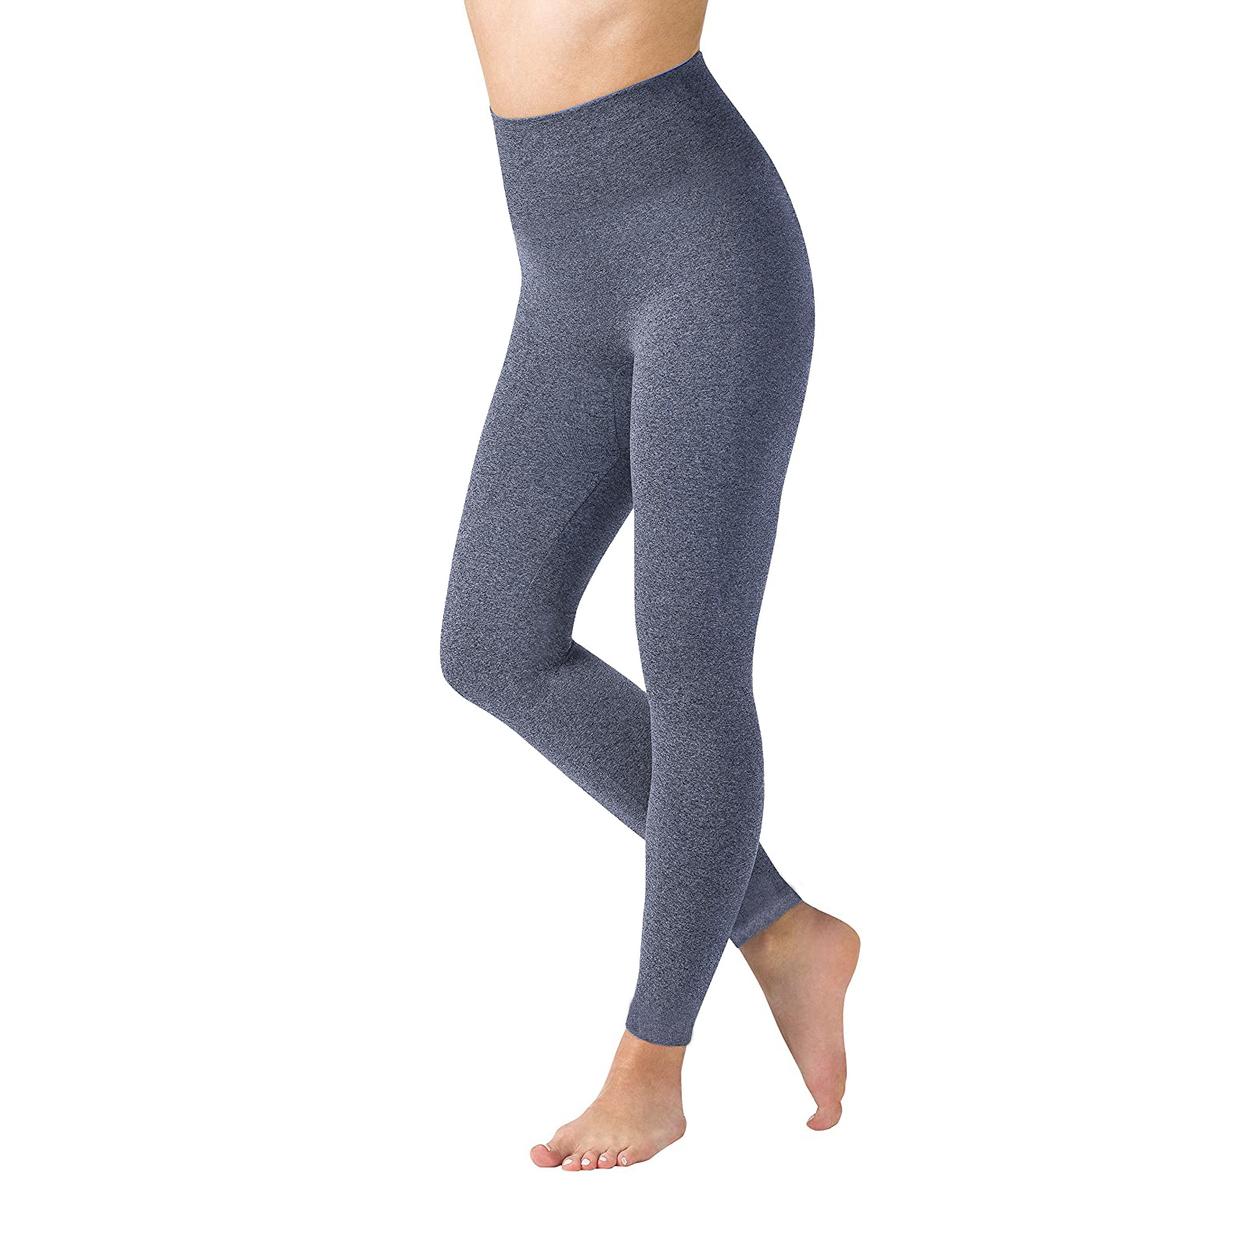 Women's High Waisted Ultra-Soft Fleece Lined Warm Marled Leggings(Available In Plus Sizes) - Navy, 1x